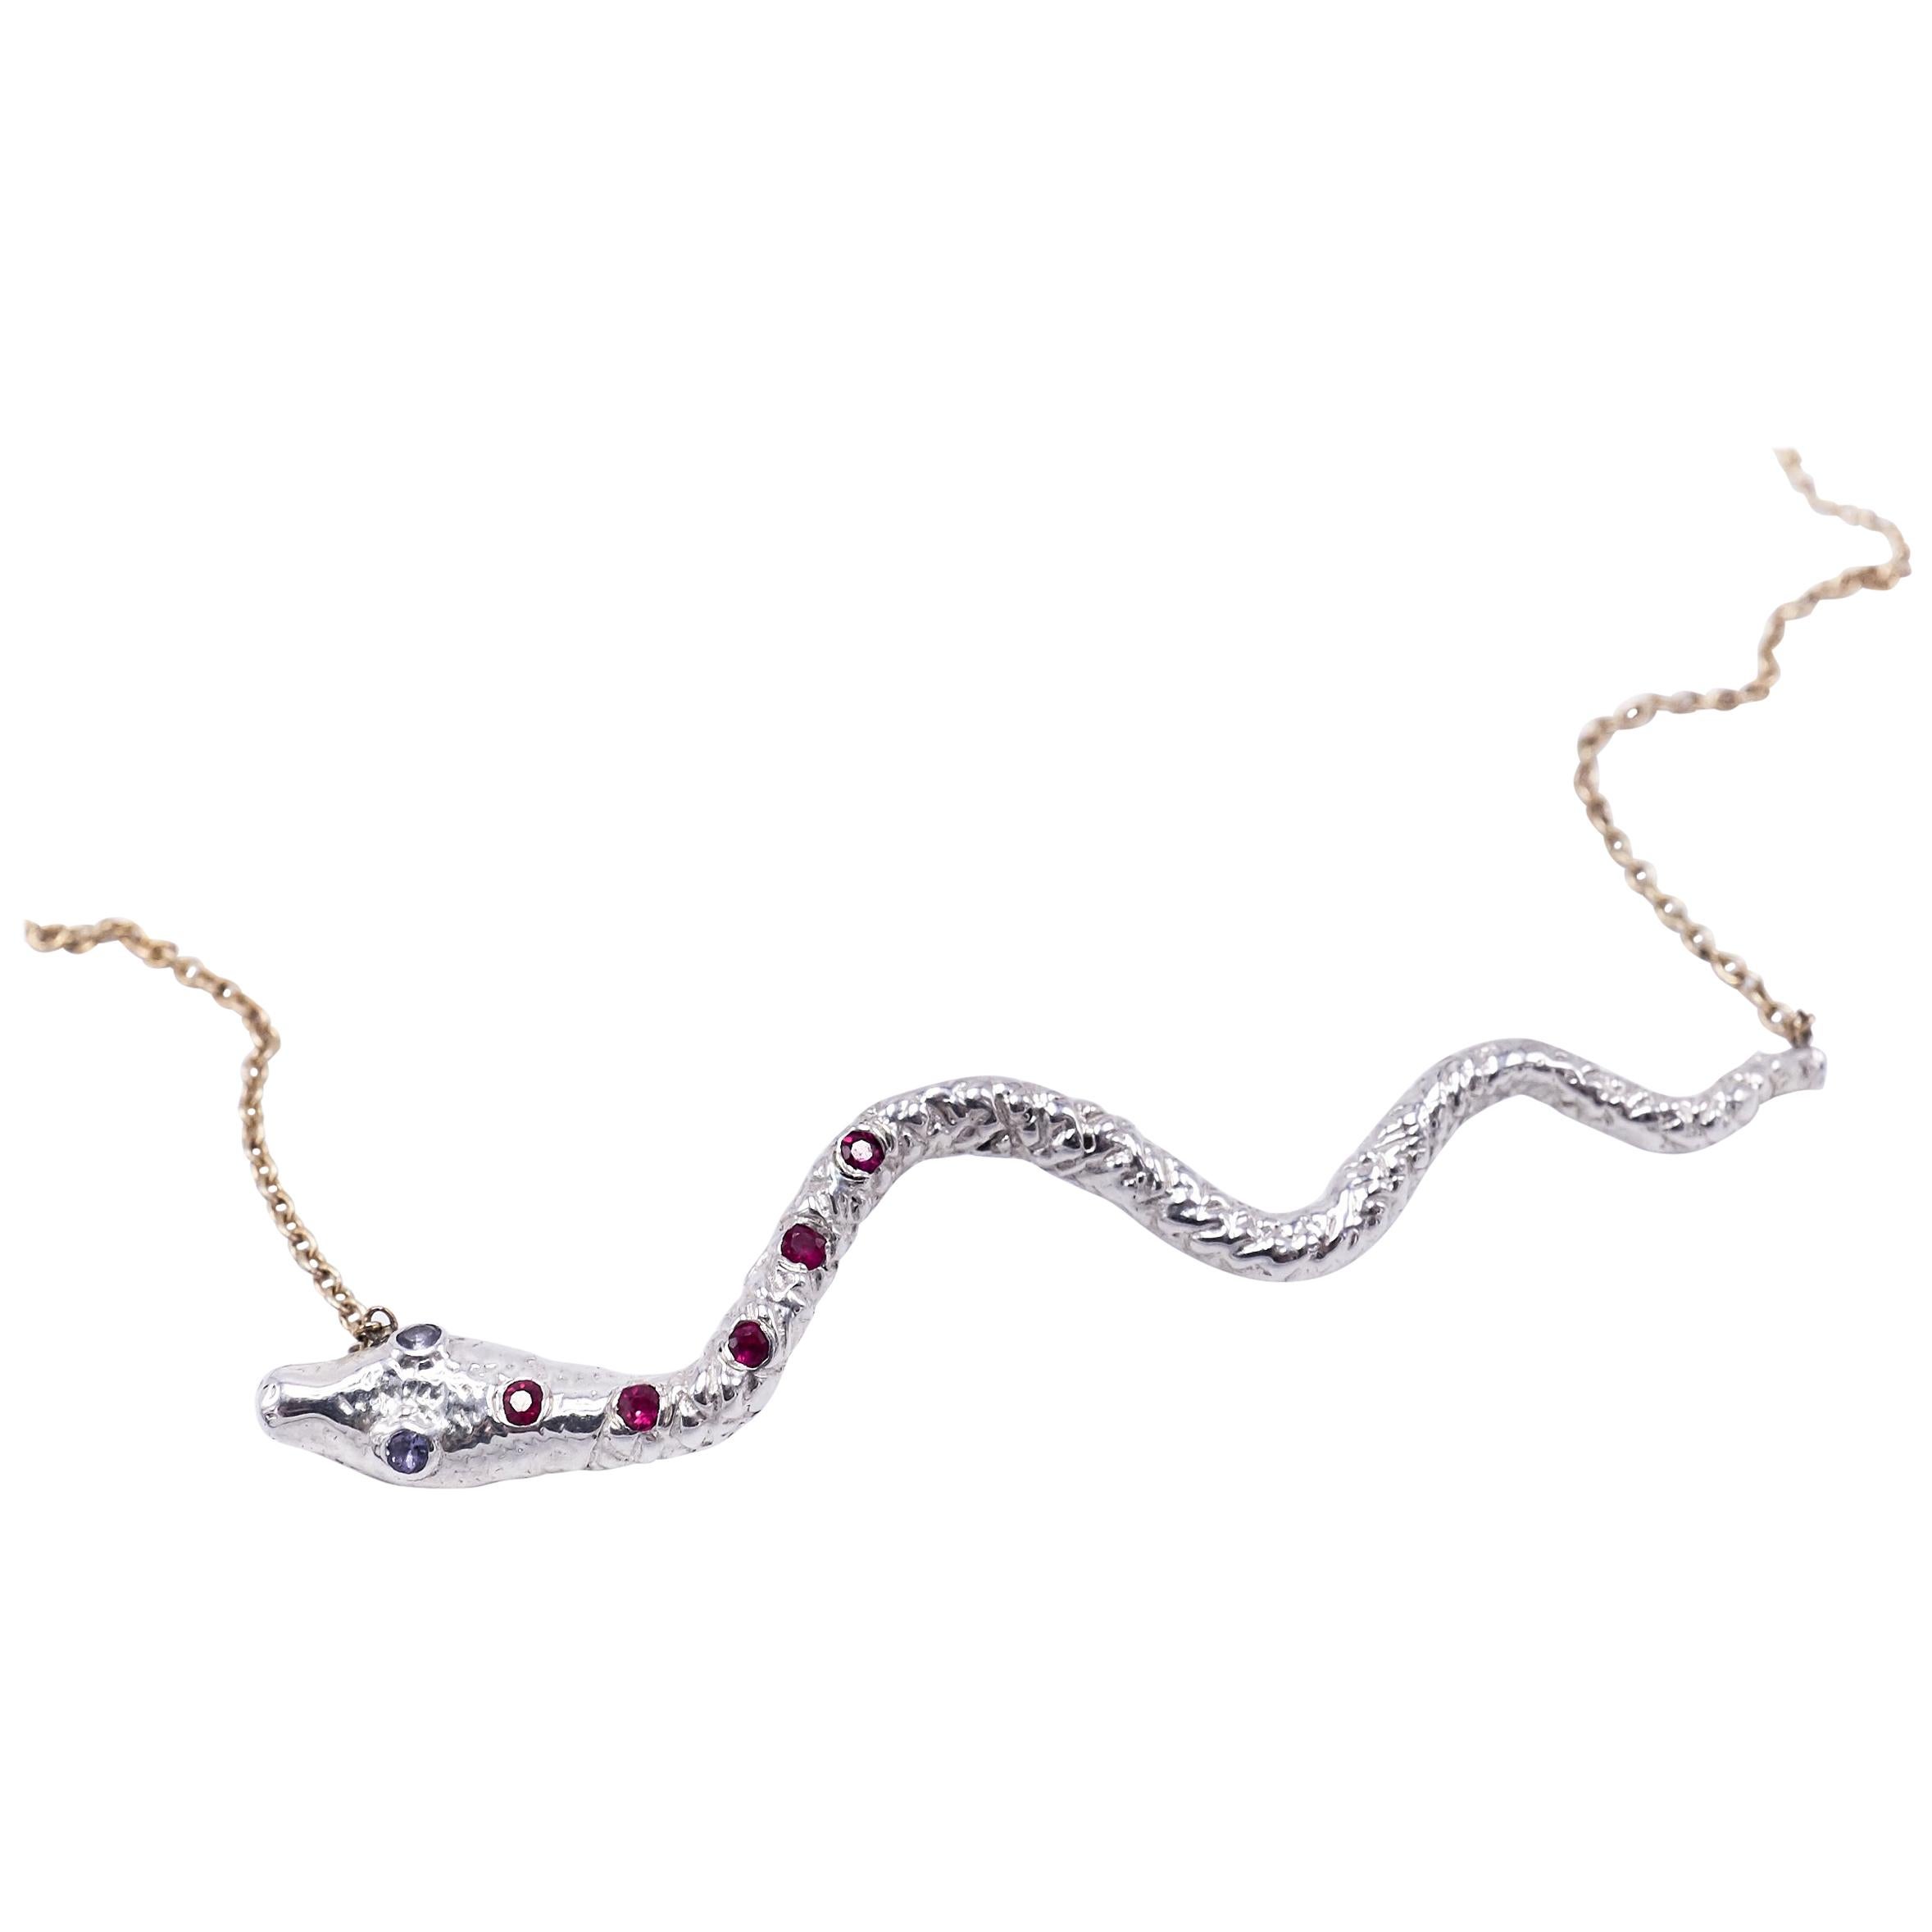 Snake Necklace Silver Ruby Iolite Gold Filled Chain J Dauphin